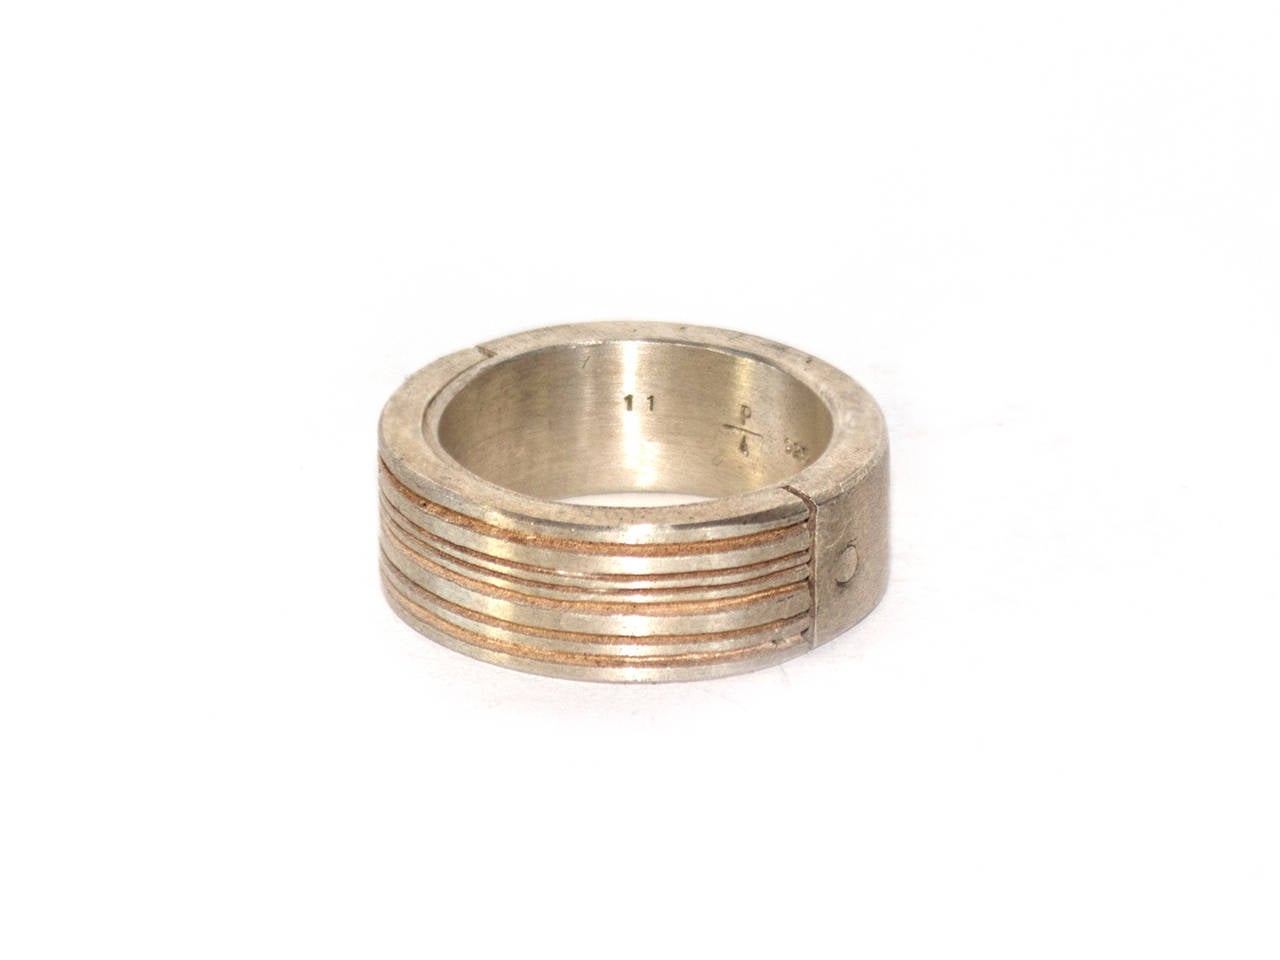 Matte sterling and matte brass ring by P/4
Size: 11